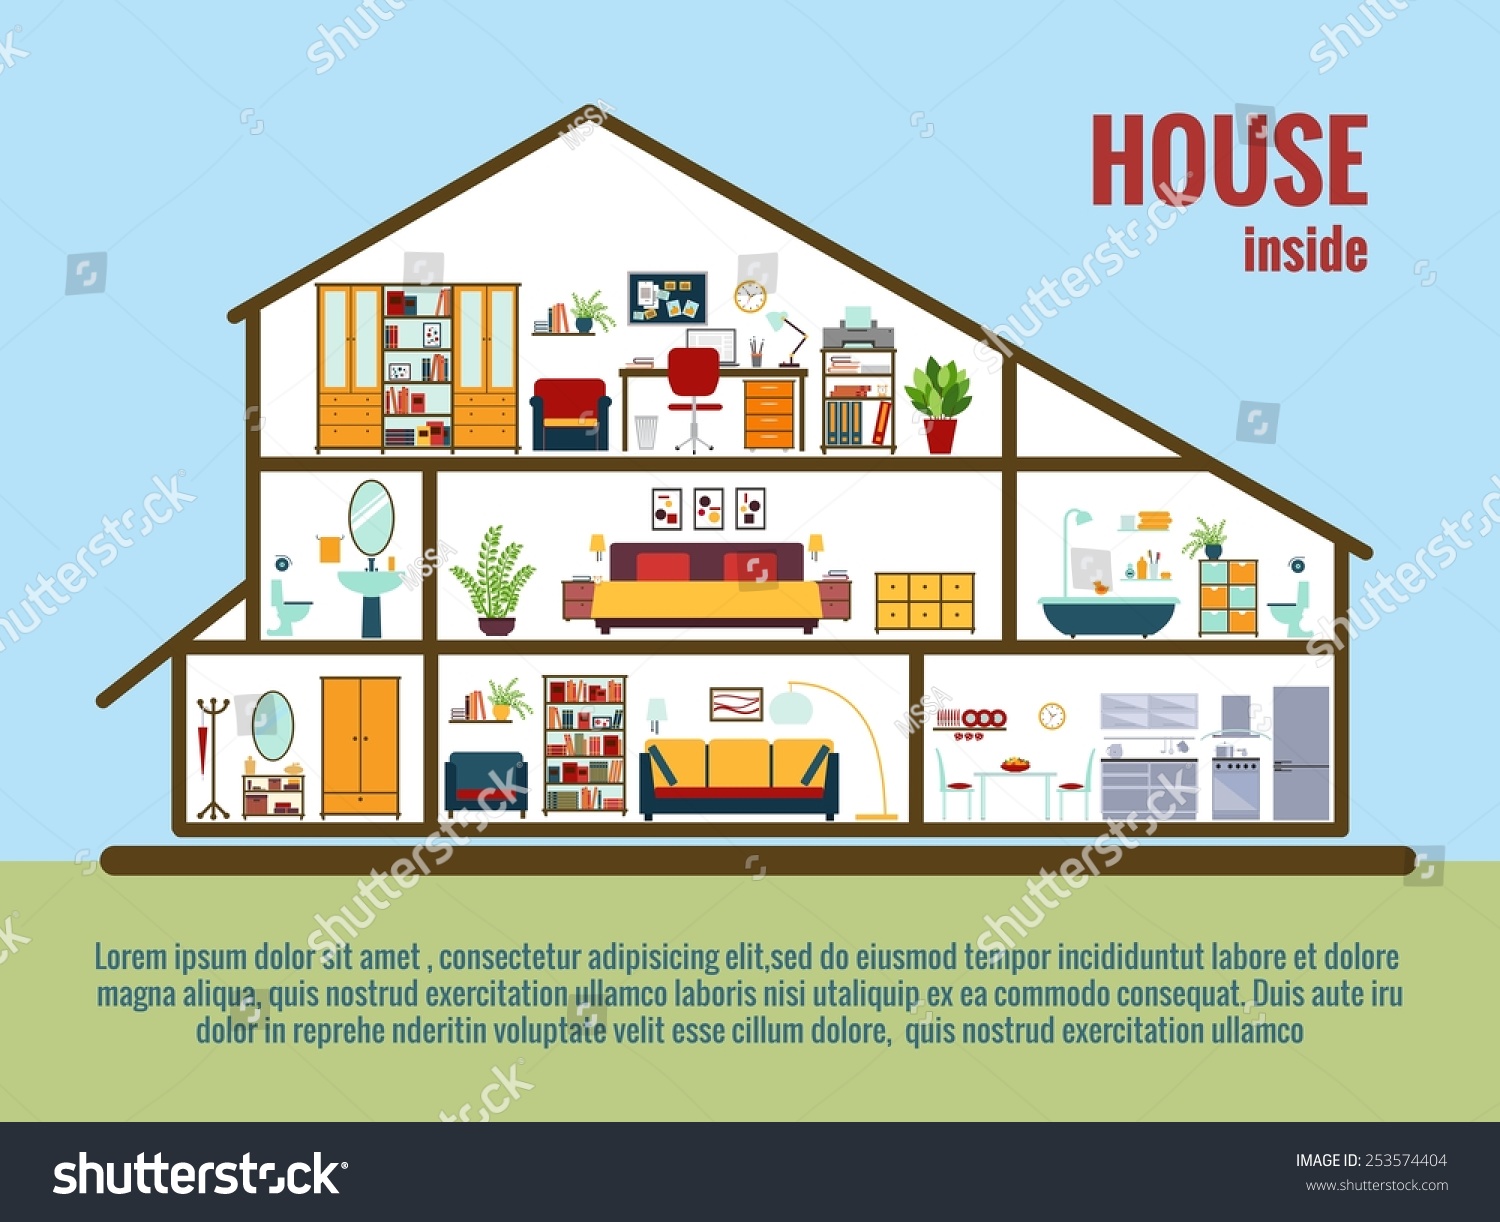 inside the house clipart - photo #42